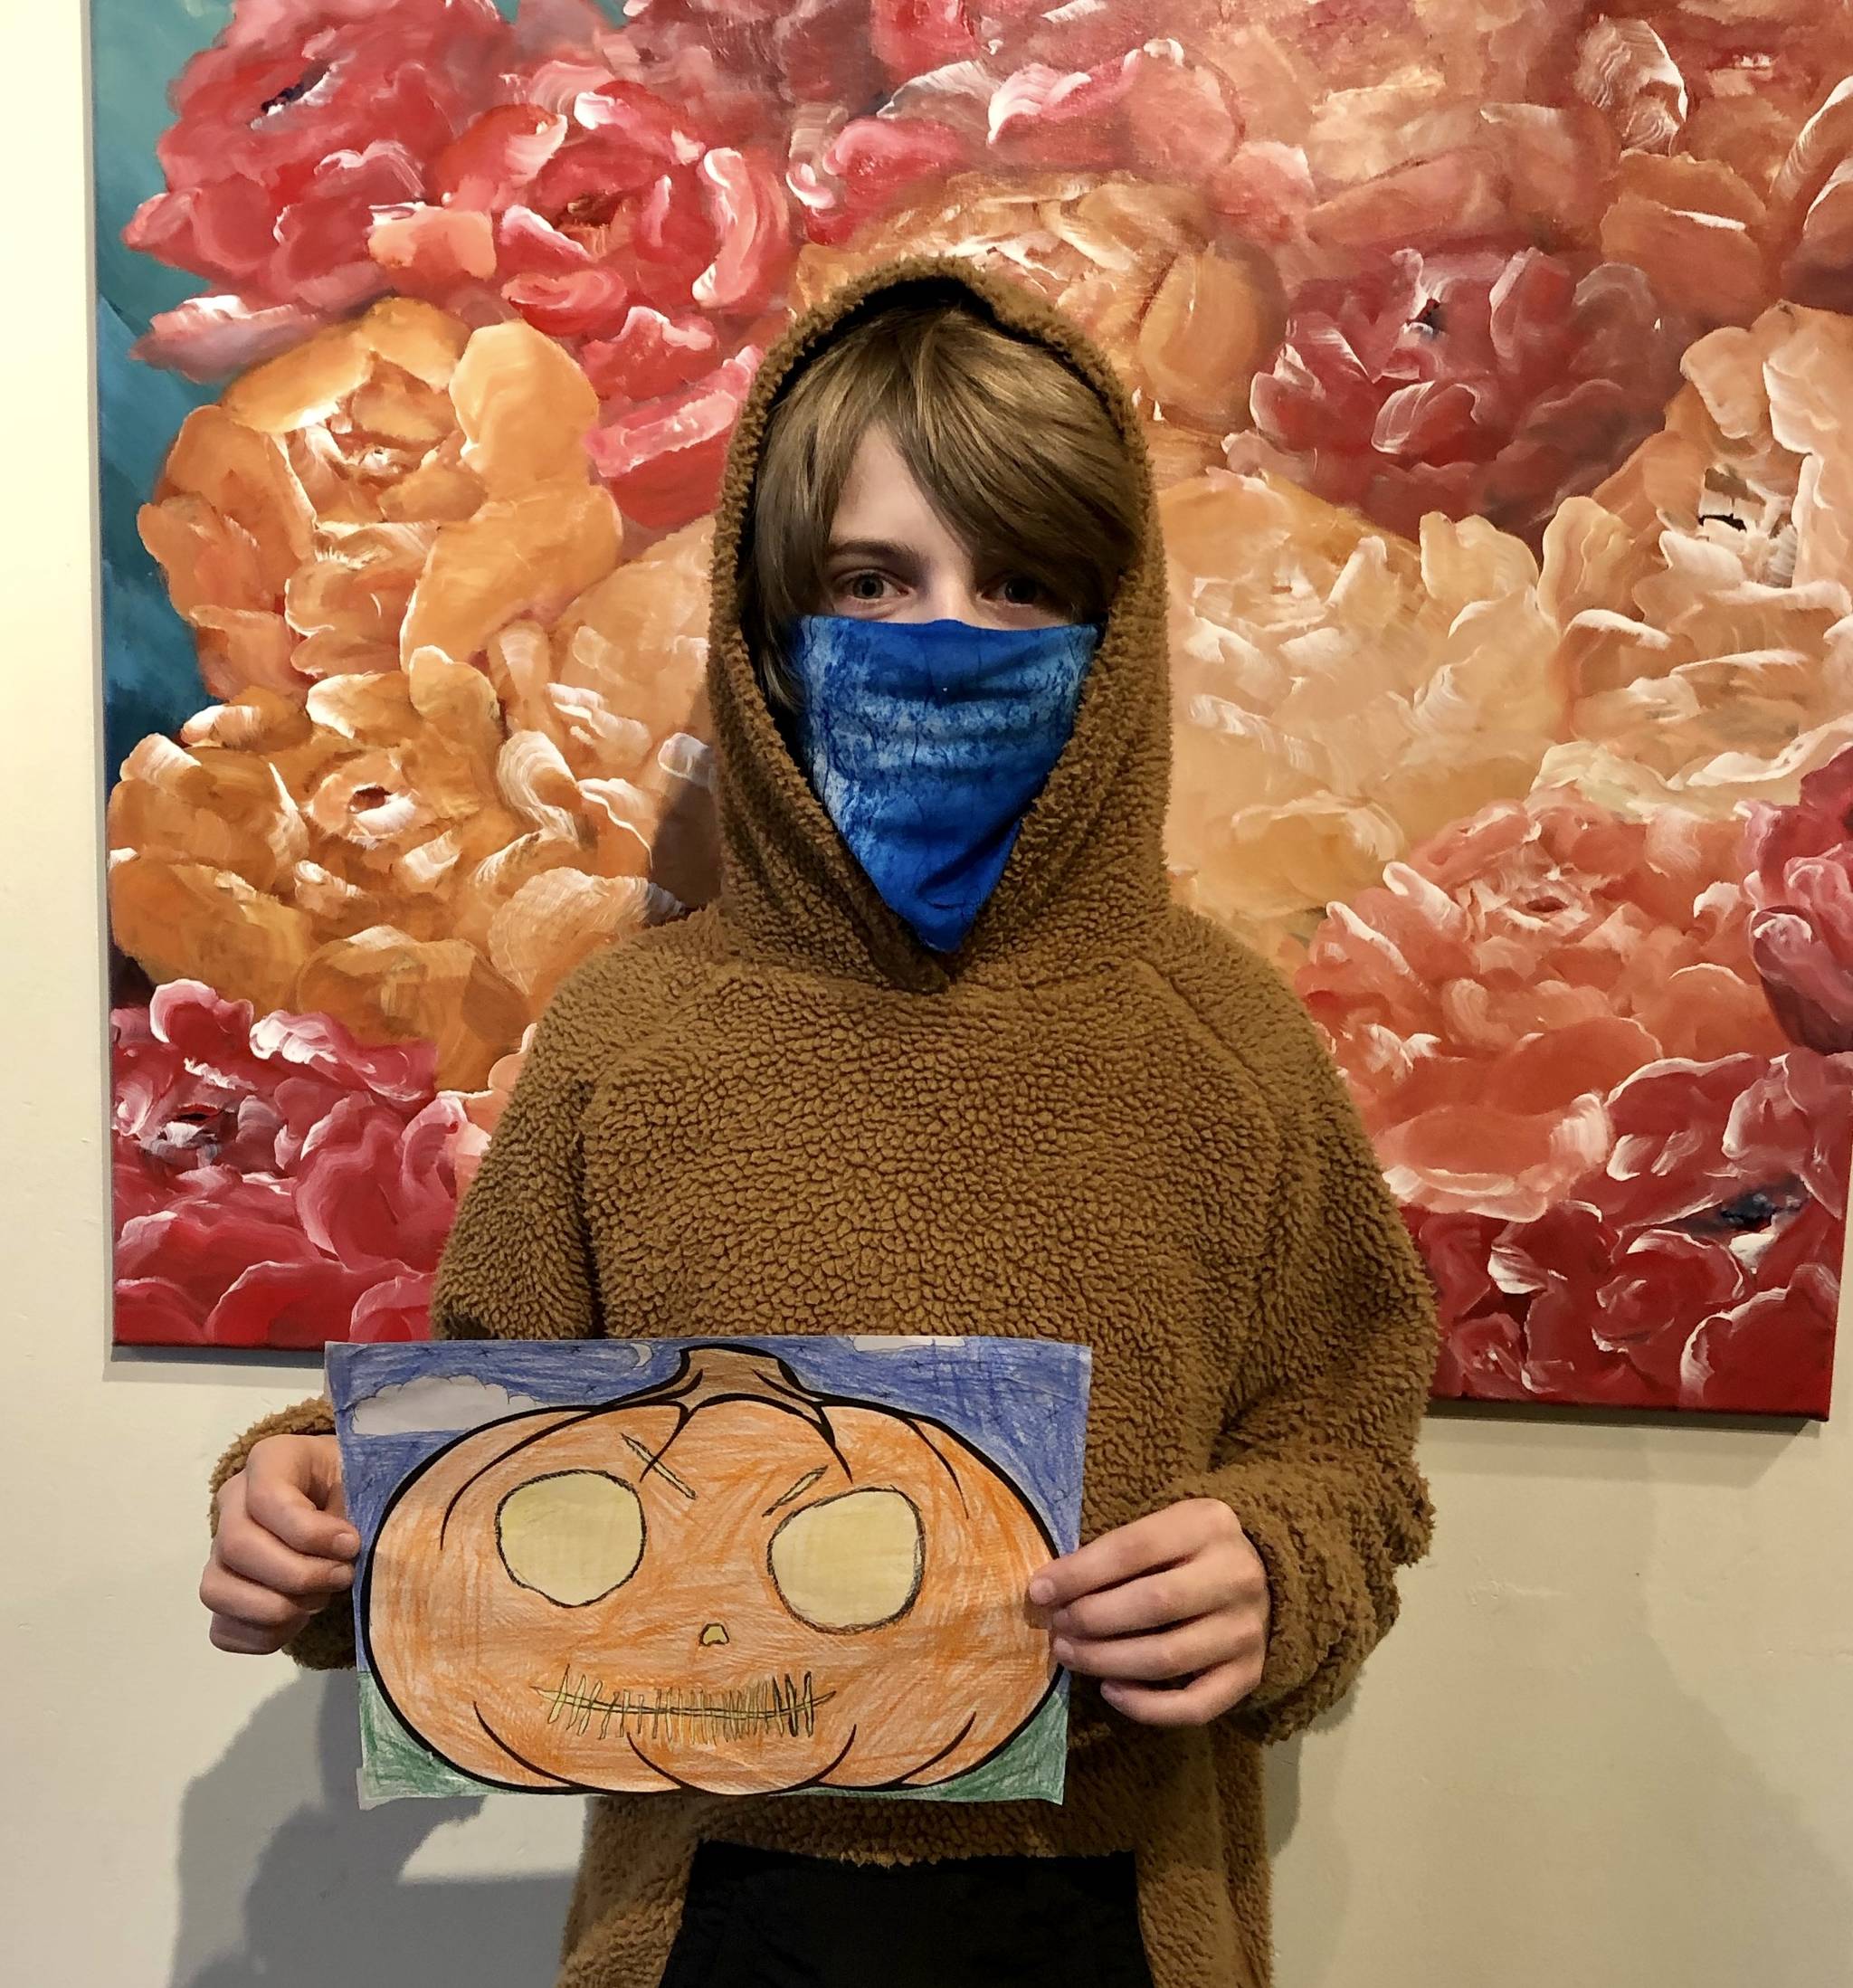 Dominic Hall, 12, won Coppa’s 2020 Halloween Coloring Contestthe contest with his colorful pumpkin entry. (Courtesy Photo)